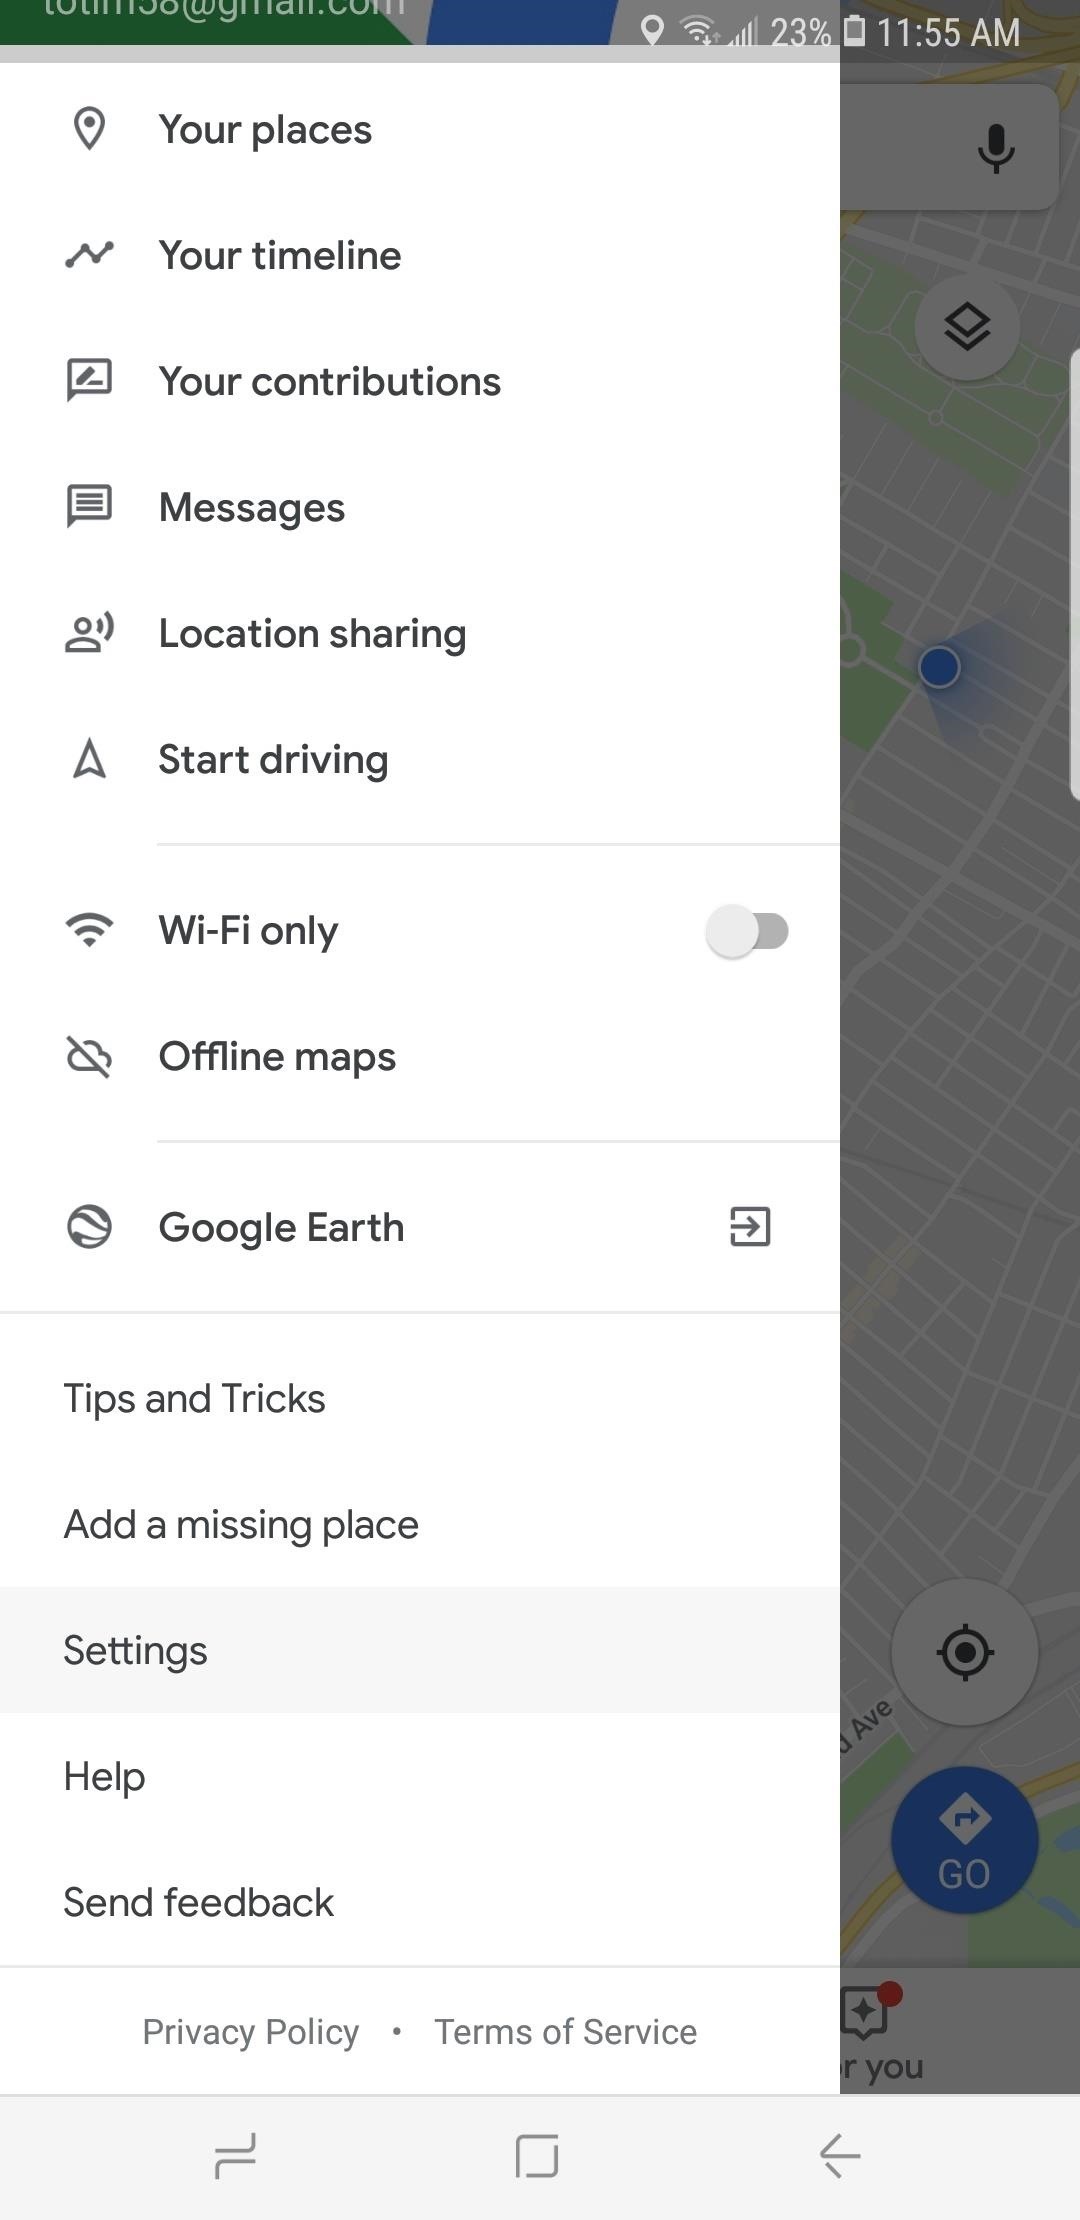 How to Enable Google Assistant in Maps for Hands-Free Navigation Help on iPhone or Android